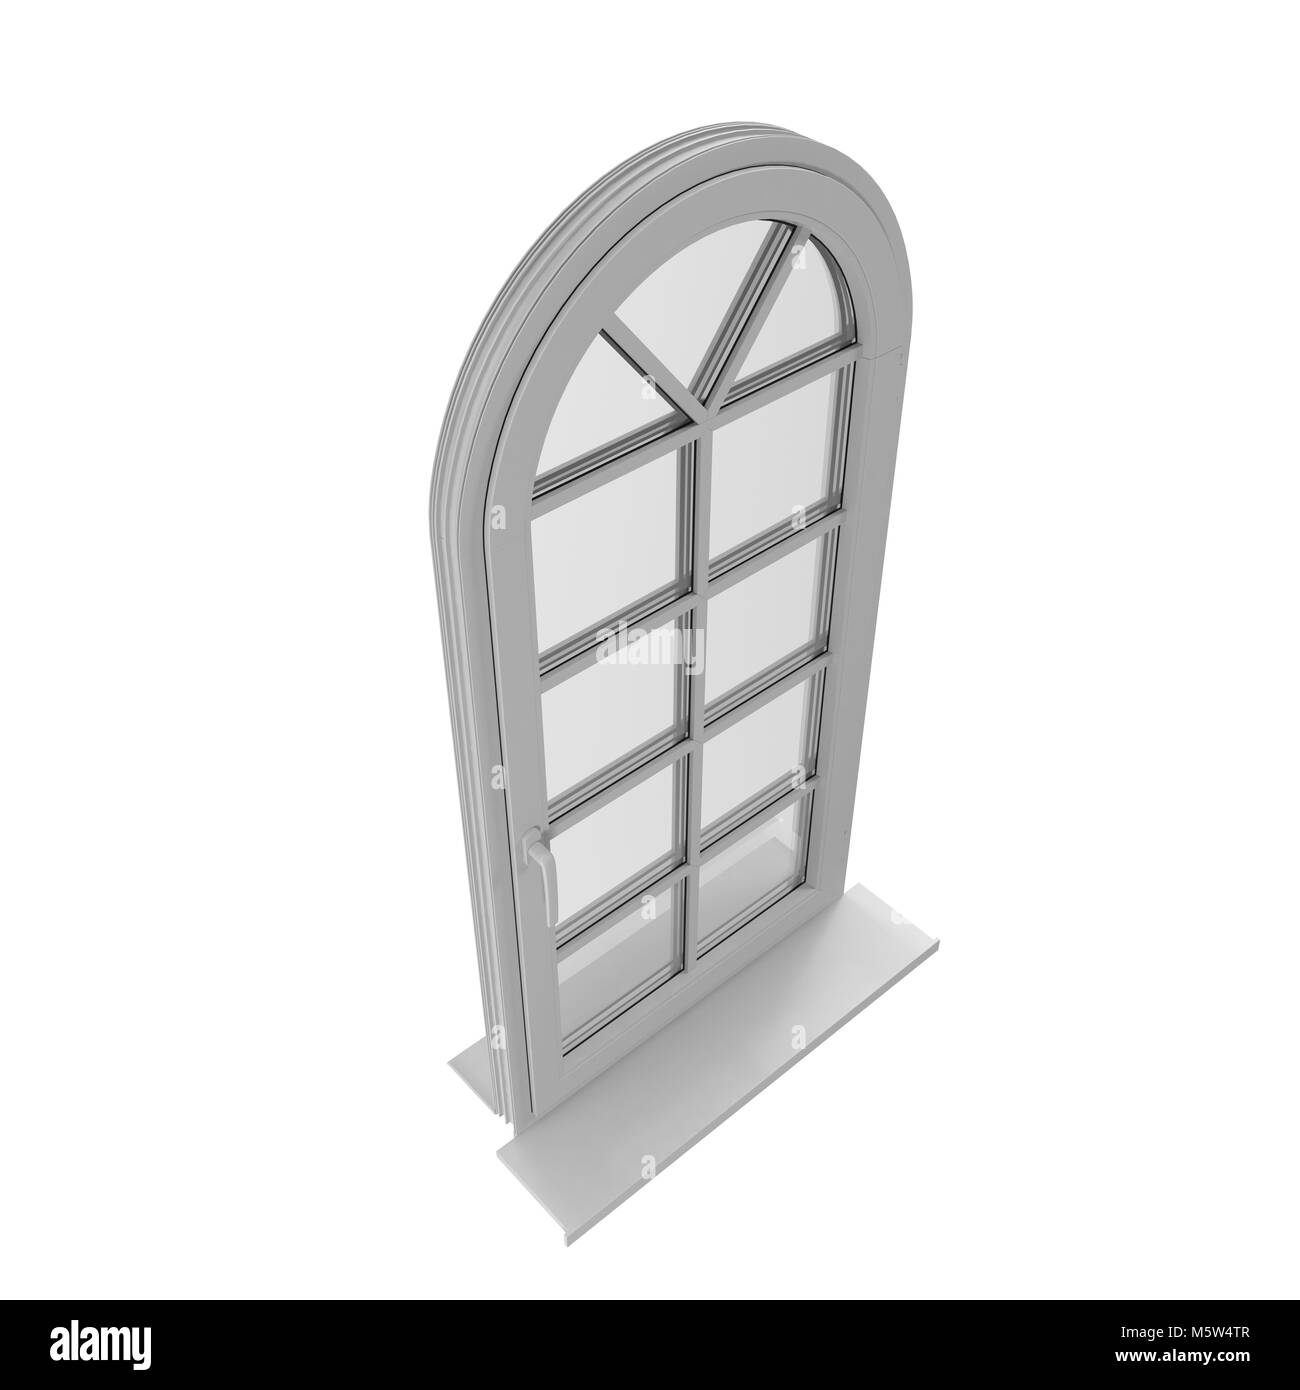 Arched Model Cut Out Stock Images And Pictures Alamy 